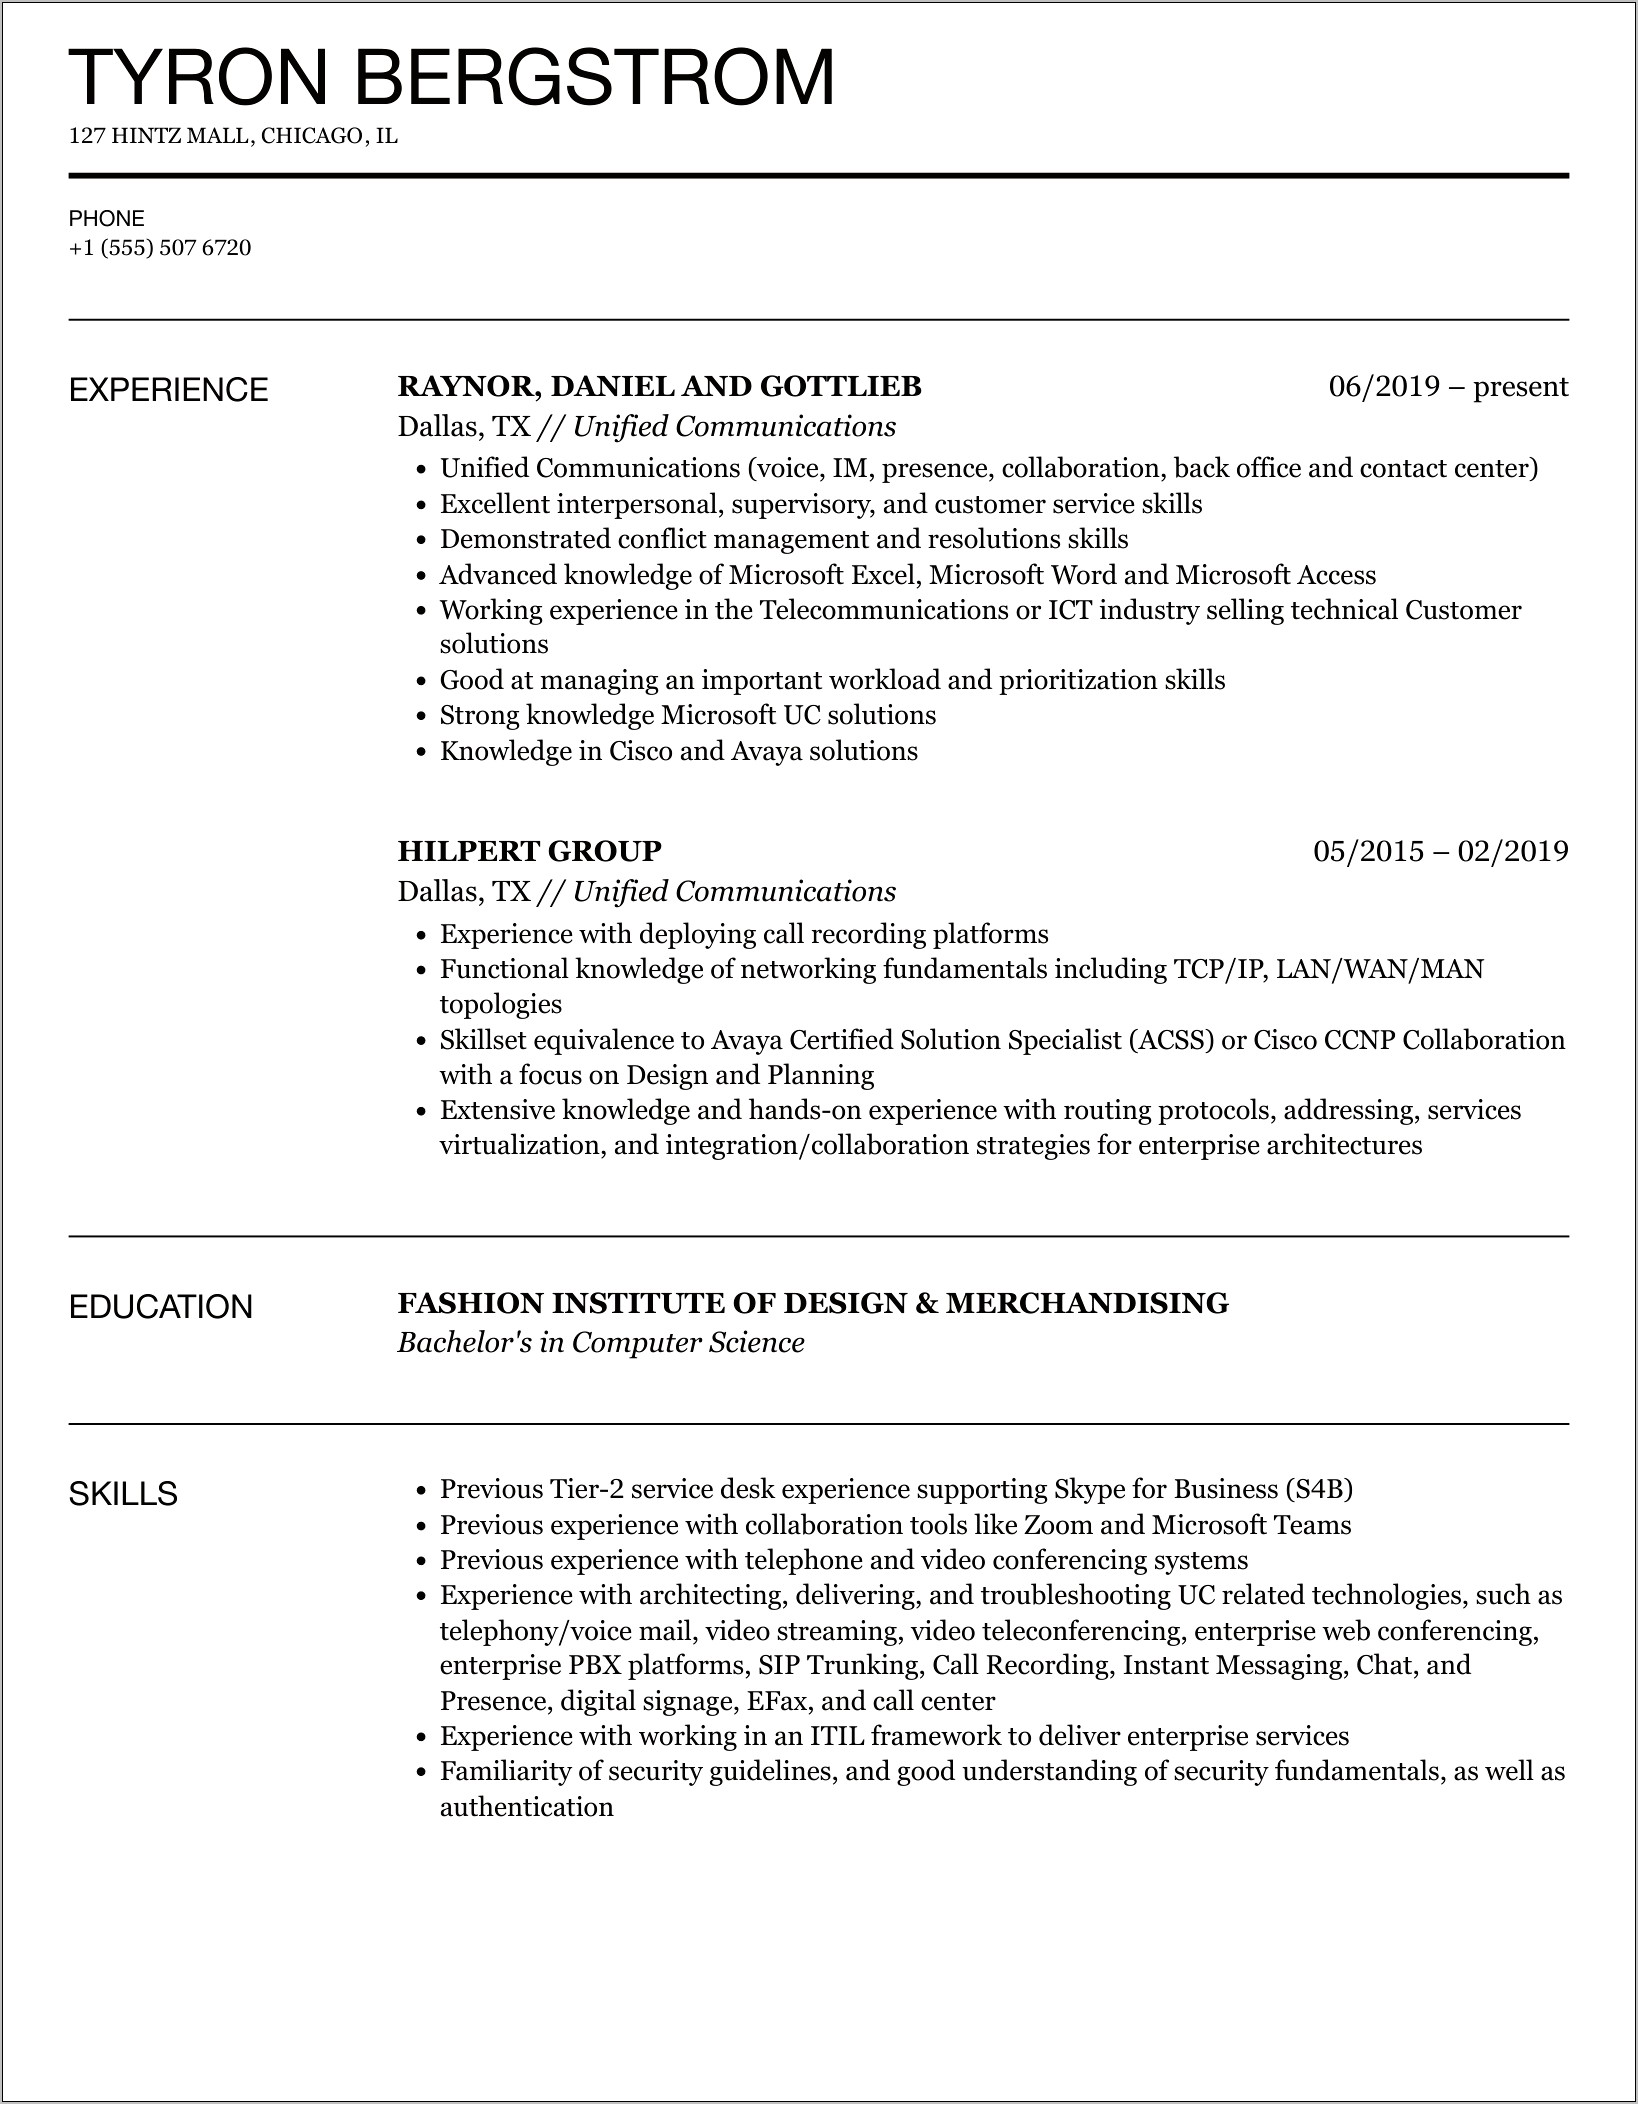 Sample Resumes On Vnx Unified